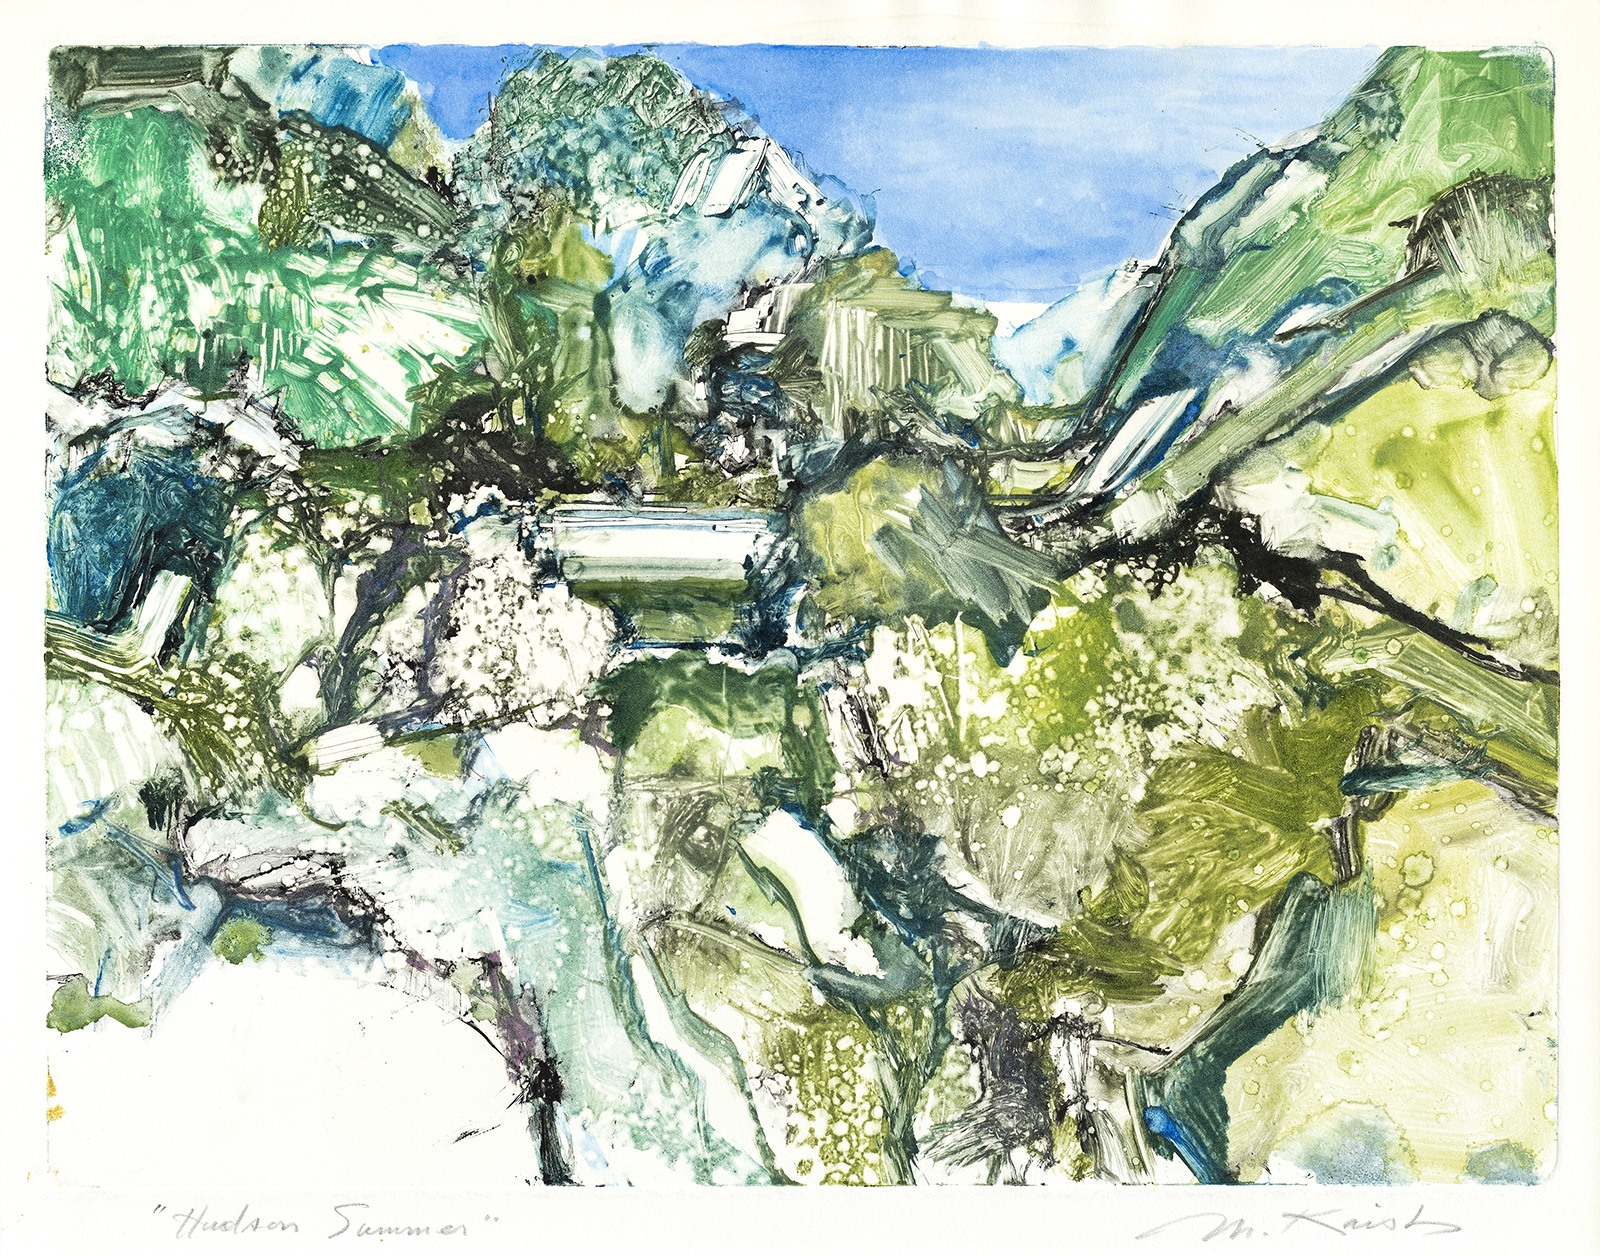 Artistic rendering of a abstract mountain landscape in colors of green adn cream and blue, wiht a portion of a blue sky in the backgorund